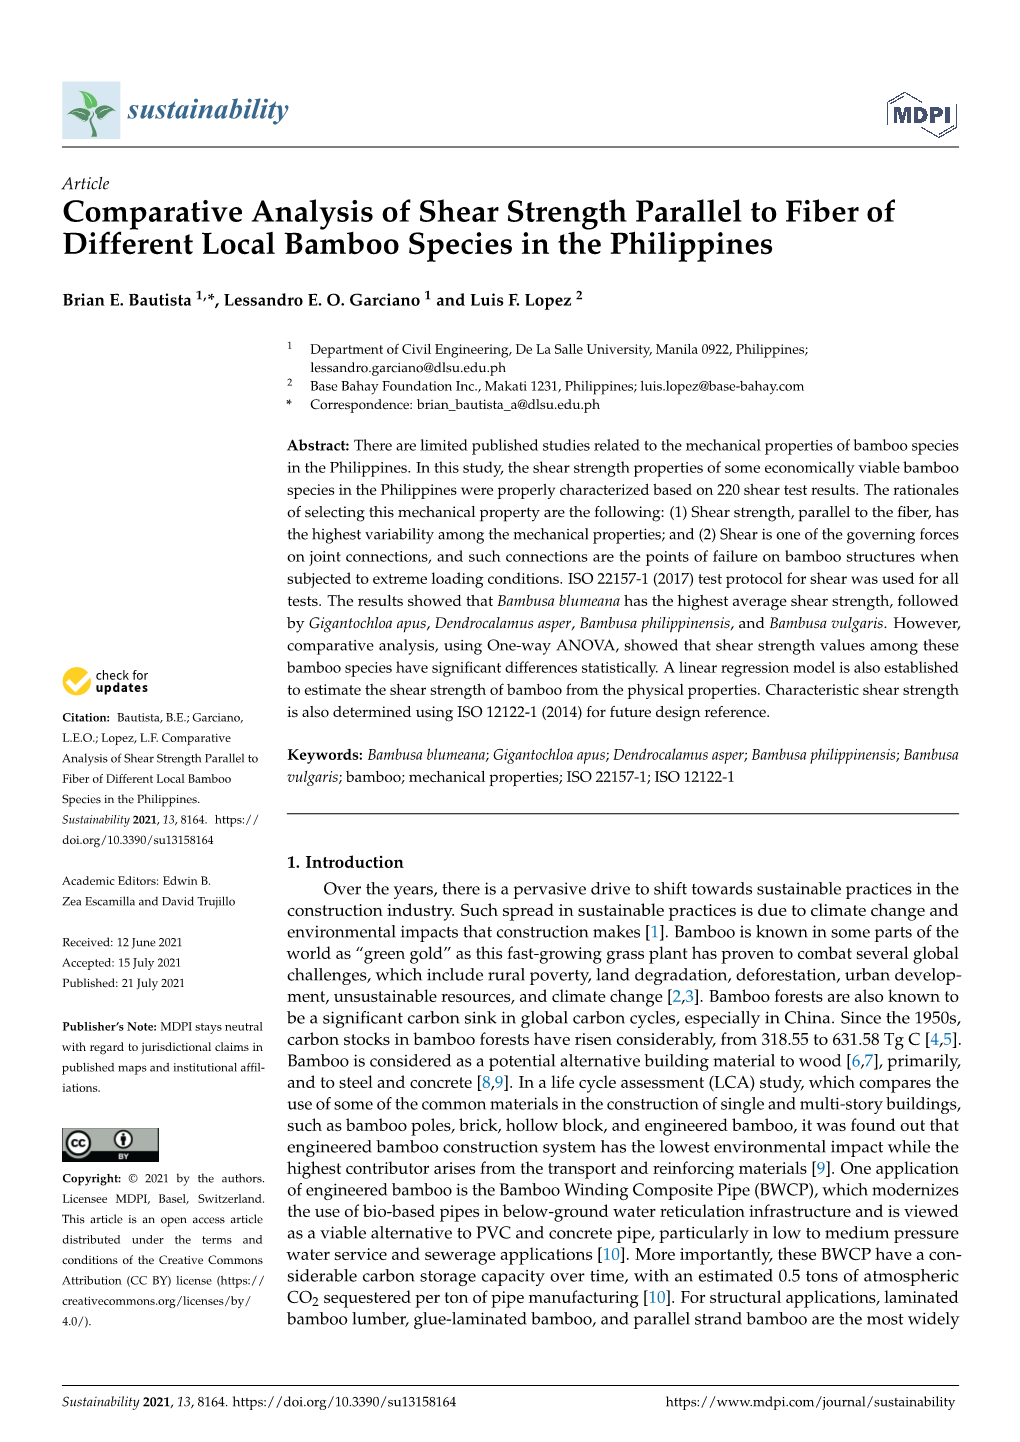 Comparative Analysis of Shear Strength Parallel to Fiber of Different Local Bamboo Species in the Philippines